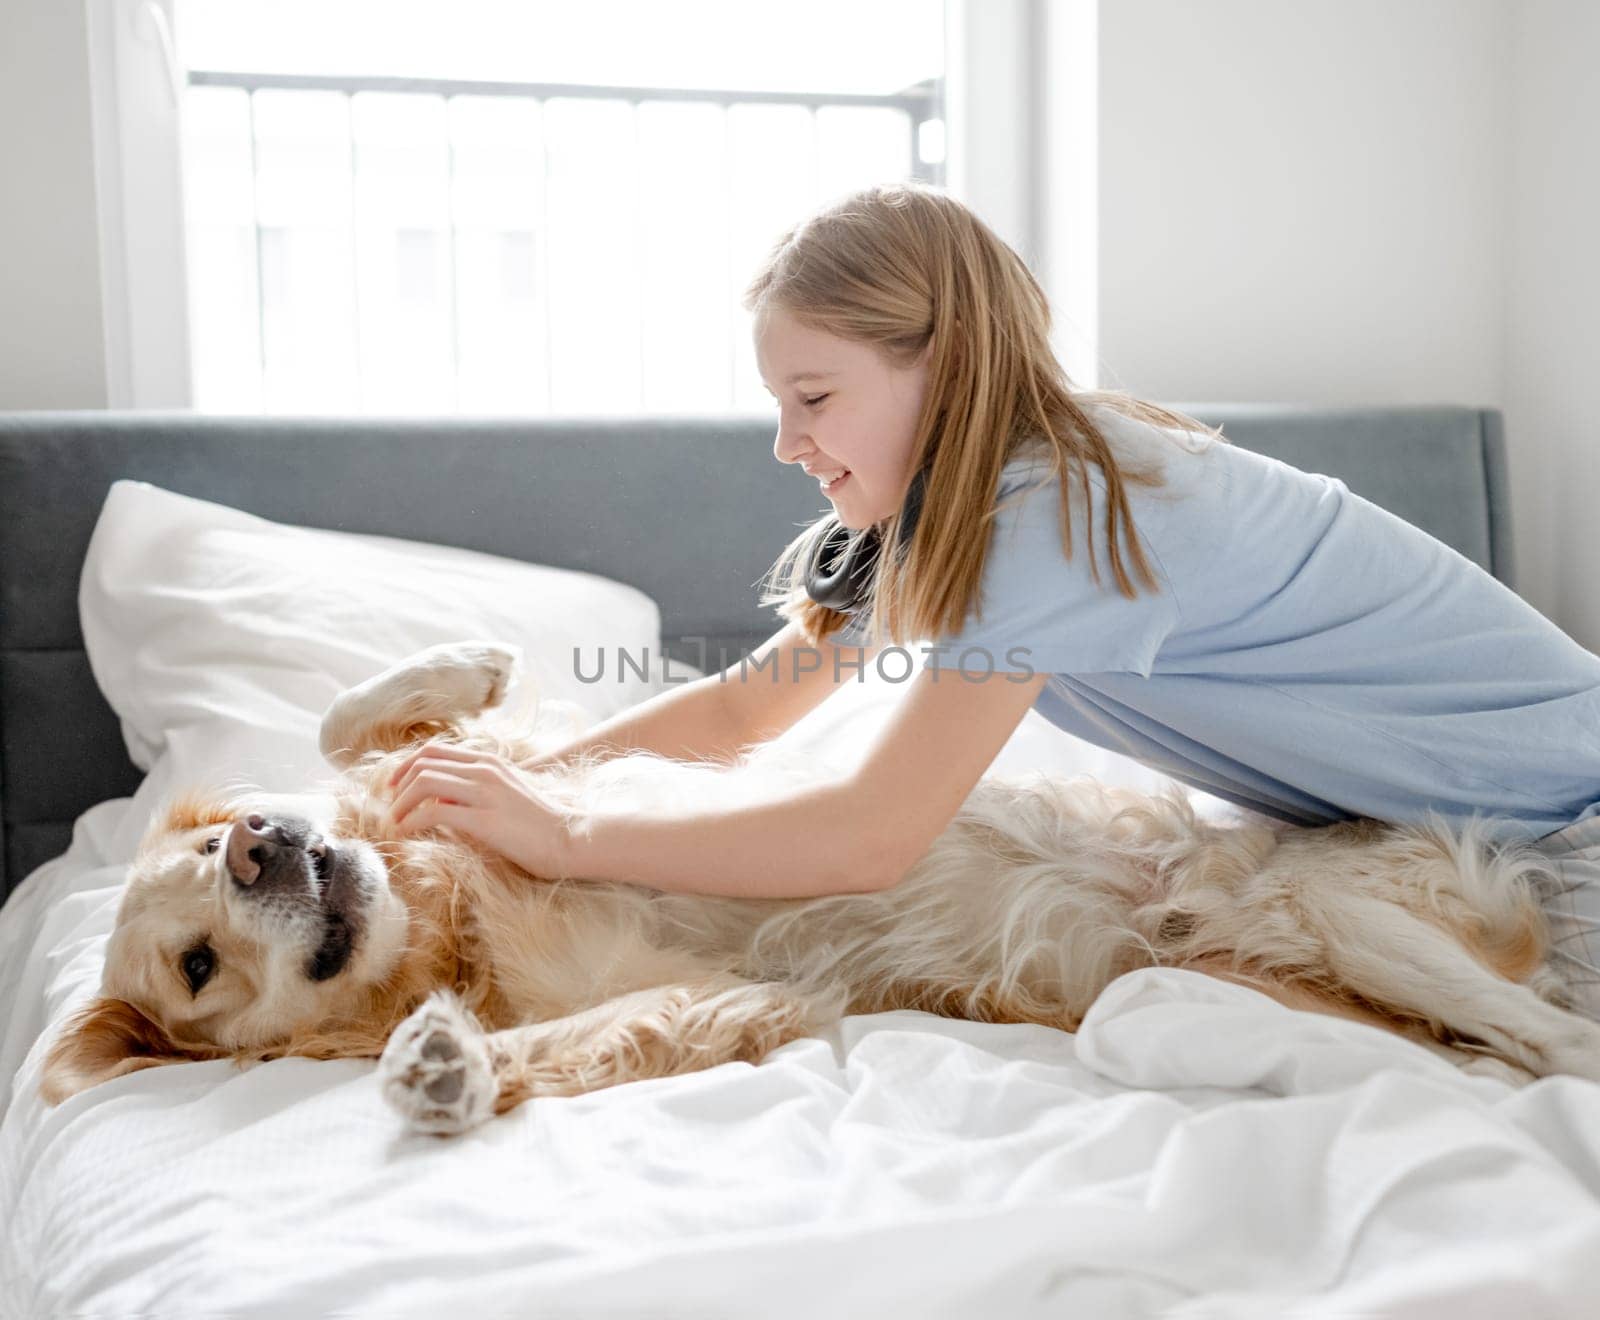 Girl Plays With Golden Retriever On Bed by tan4ikk1